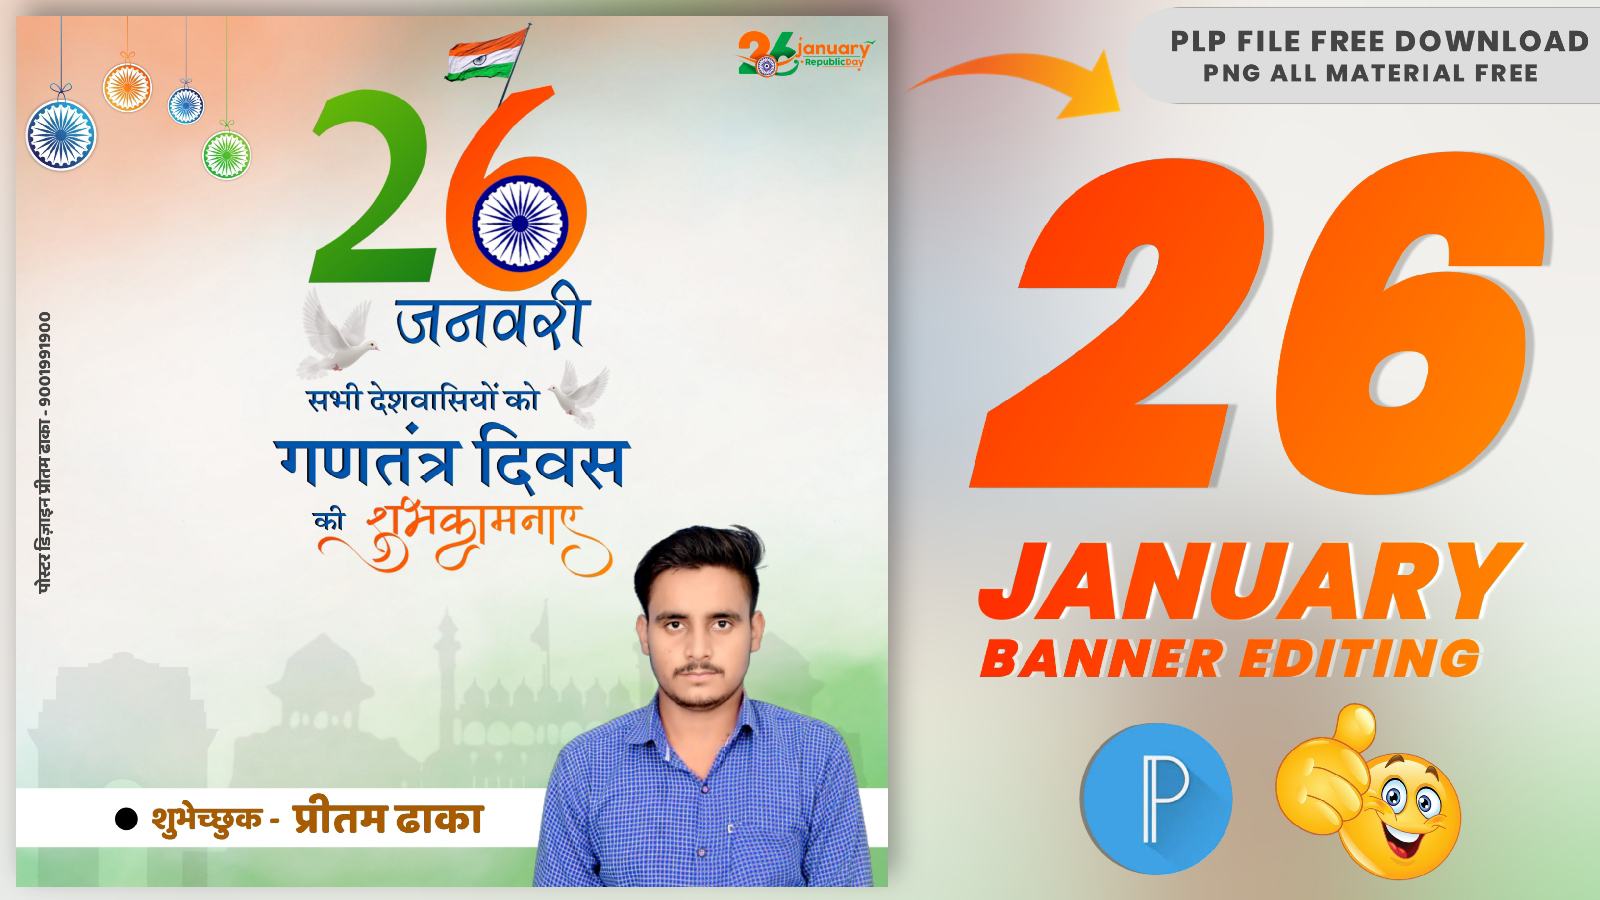 26 January banner edting 2022 || 26 January poster kaise bnaye 2022 || Plp  file free download